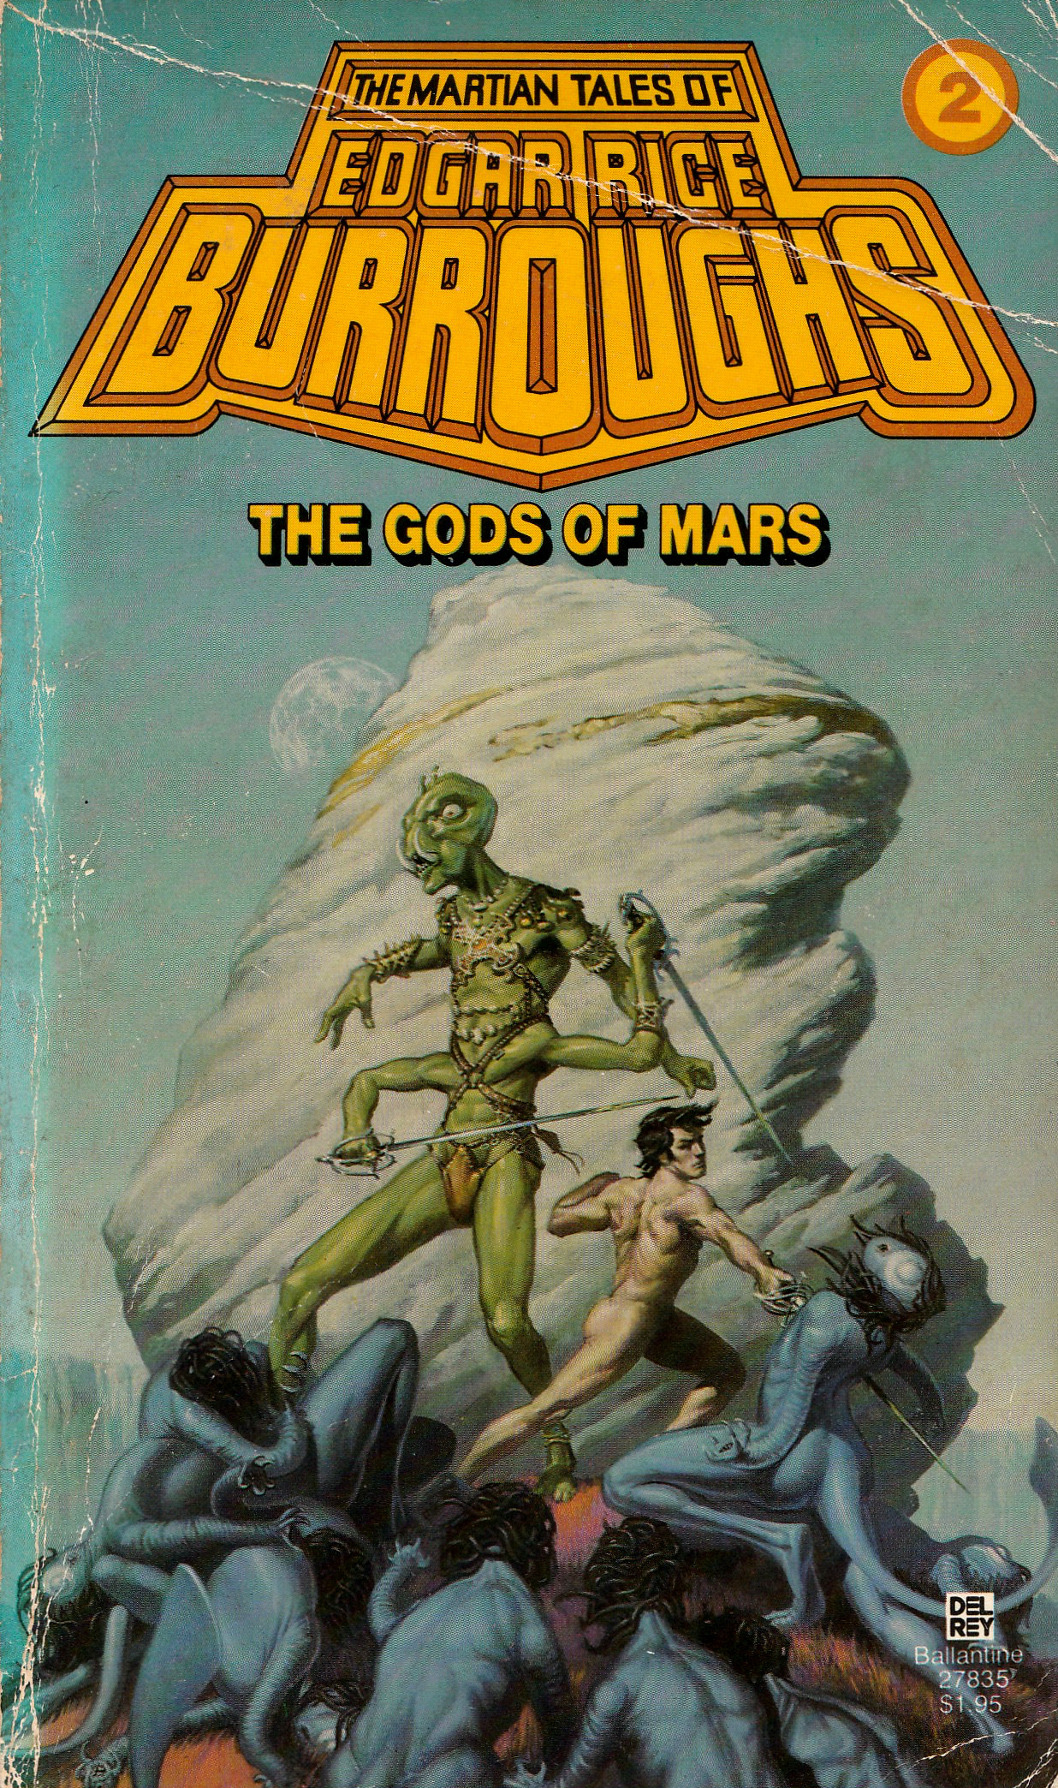 The Gods of Mars, by Edgar Rice Burroughs (Del Rey, 1981), From a charity shop in